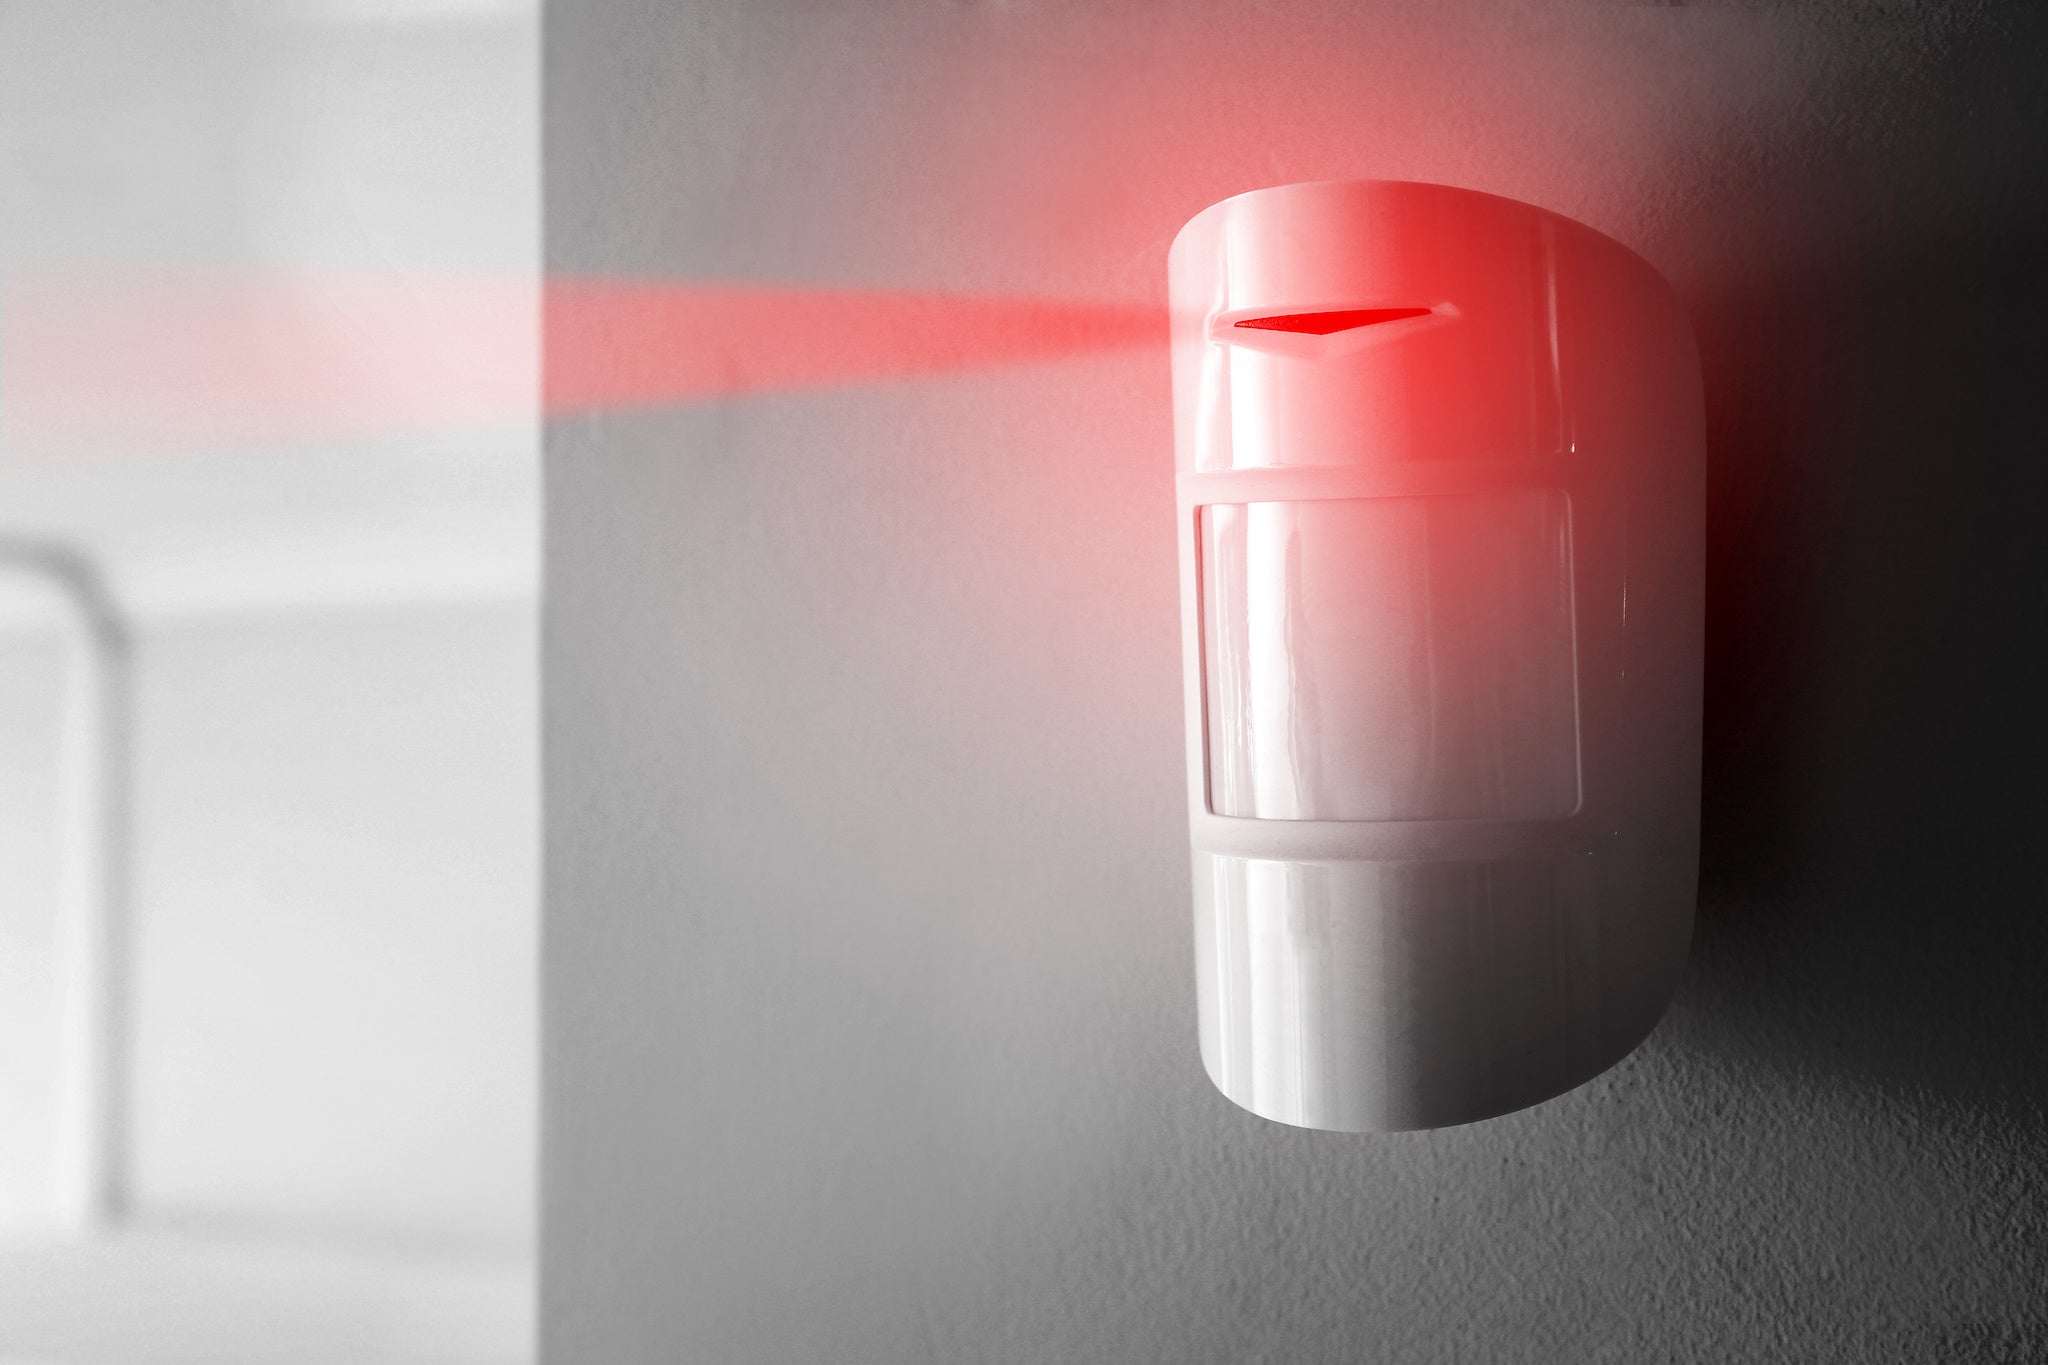 Forget to turn off the lights? Sensor lights can help.